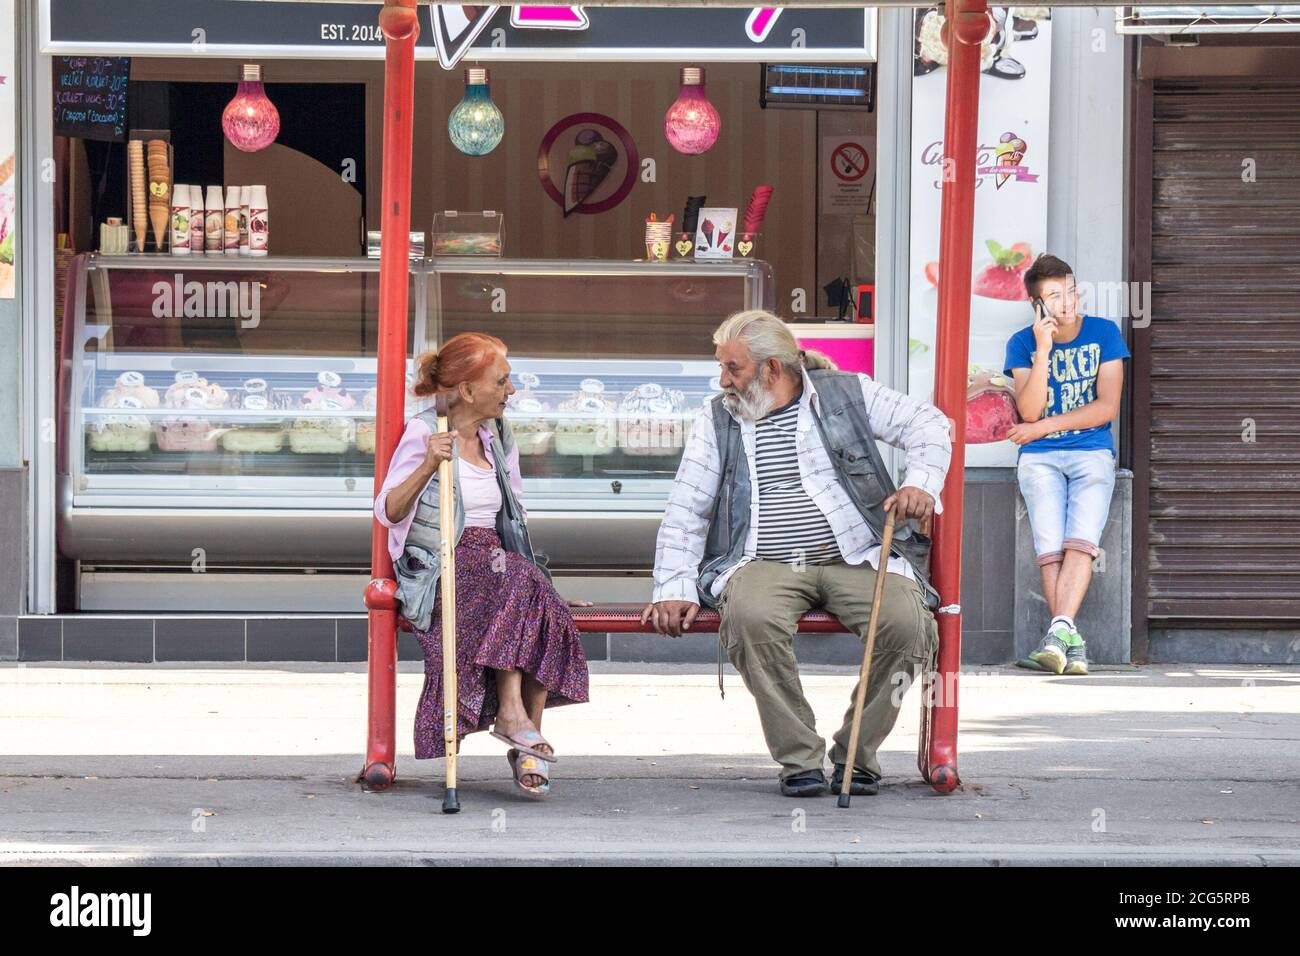 PANCEVO, SERBIA - JUNE 13, 2015: Two old persons, a senior man and a woman, belonging to the roma community discussing while waiting a bus in the cent Stock Photo